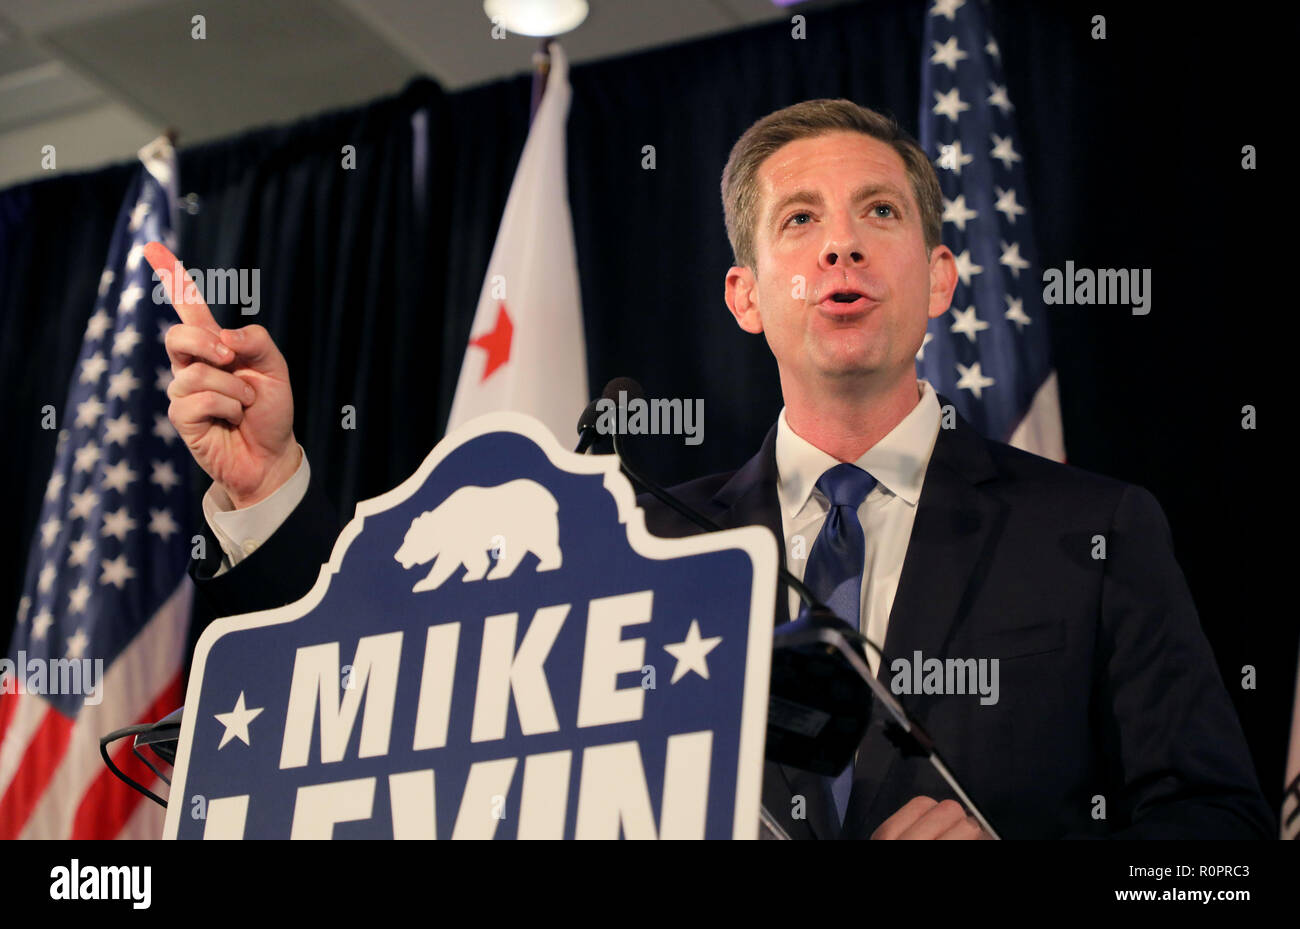 Del Mar, California, USA. 7th Nov, 2018. November 6, 2018 Del Mar, California | Congressional candidate Mike Levin speaks at his victory rally at the Hilton Hotel in Del Mar, CA. | Photo Credit: Photo by Charlie Neuman Credit: Charlie Neuman/ZUMA Wire/Alamy Live News Stock Photo